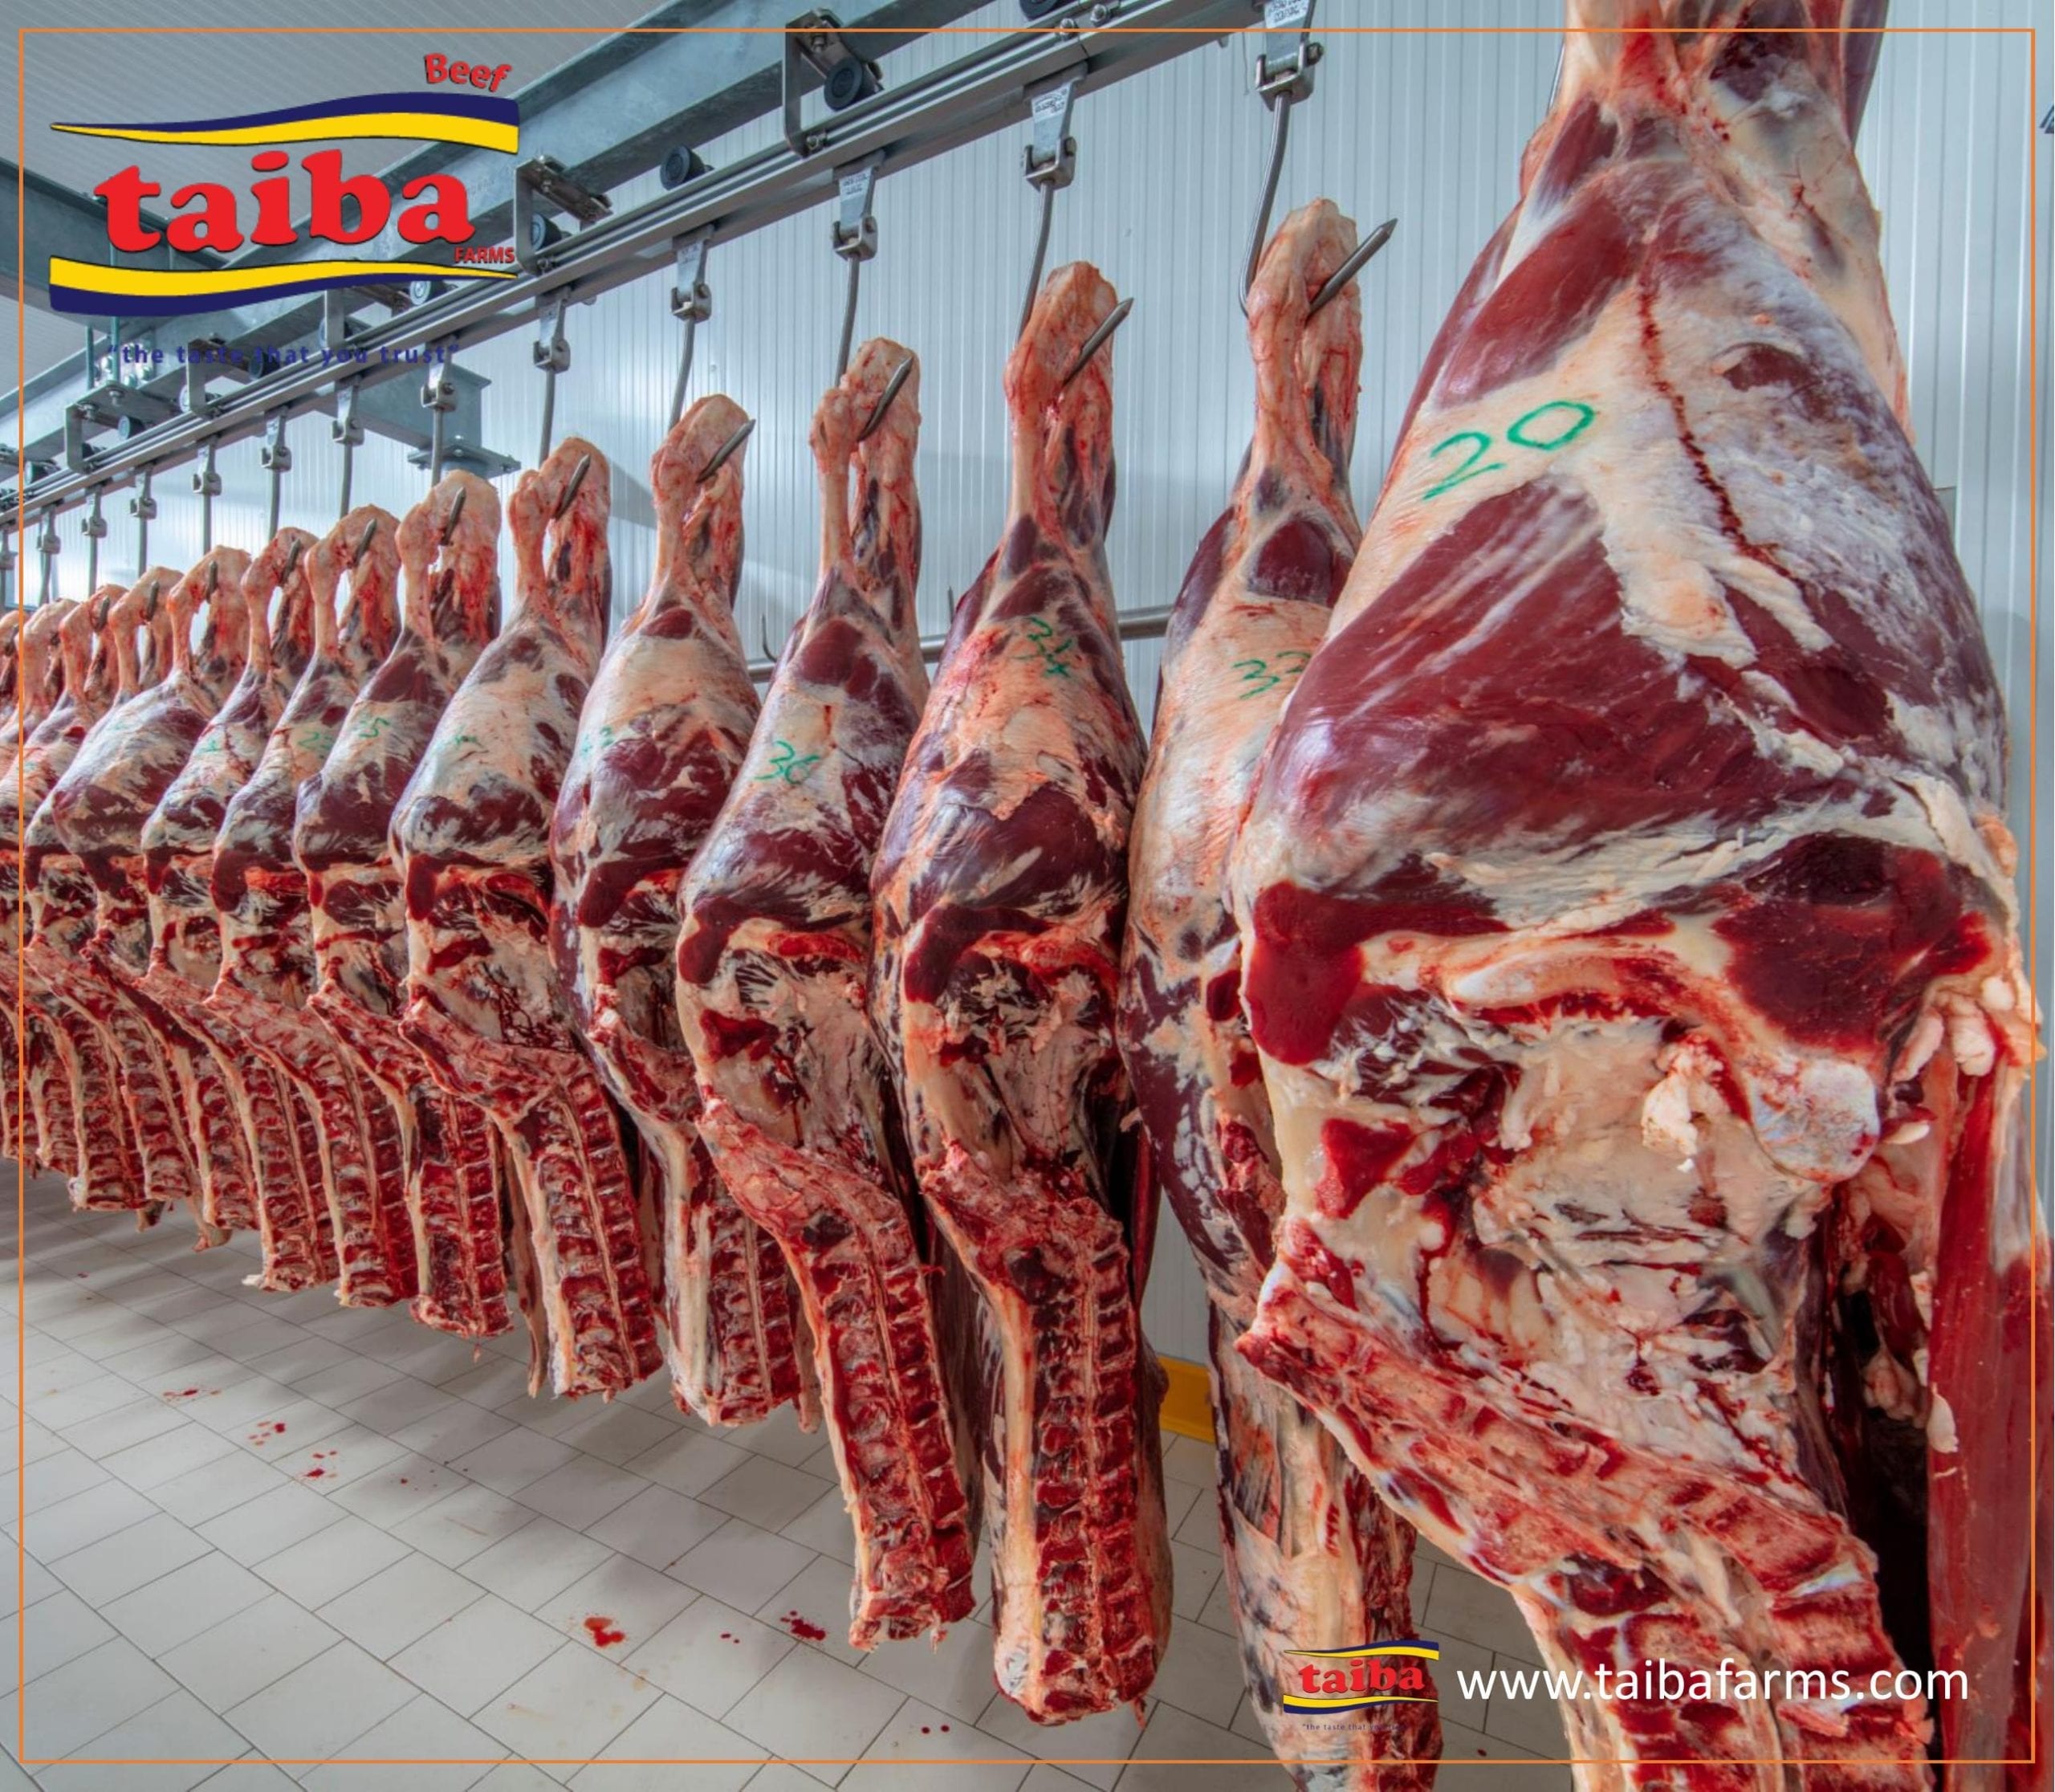 Brazilian fresh meat suppliers and Brazil meat wholesalers